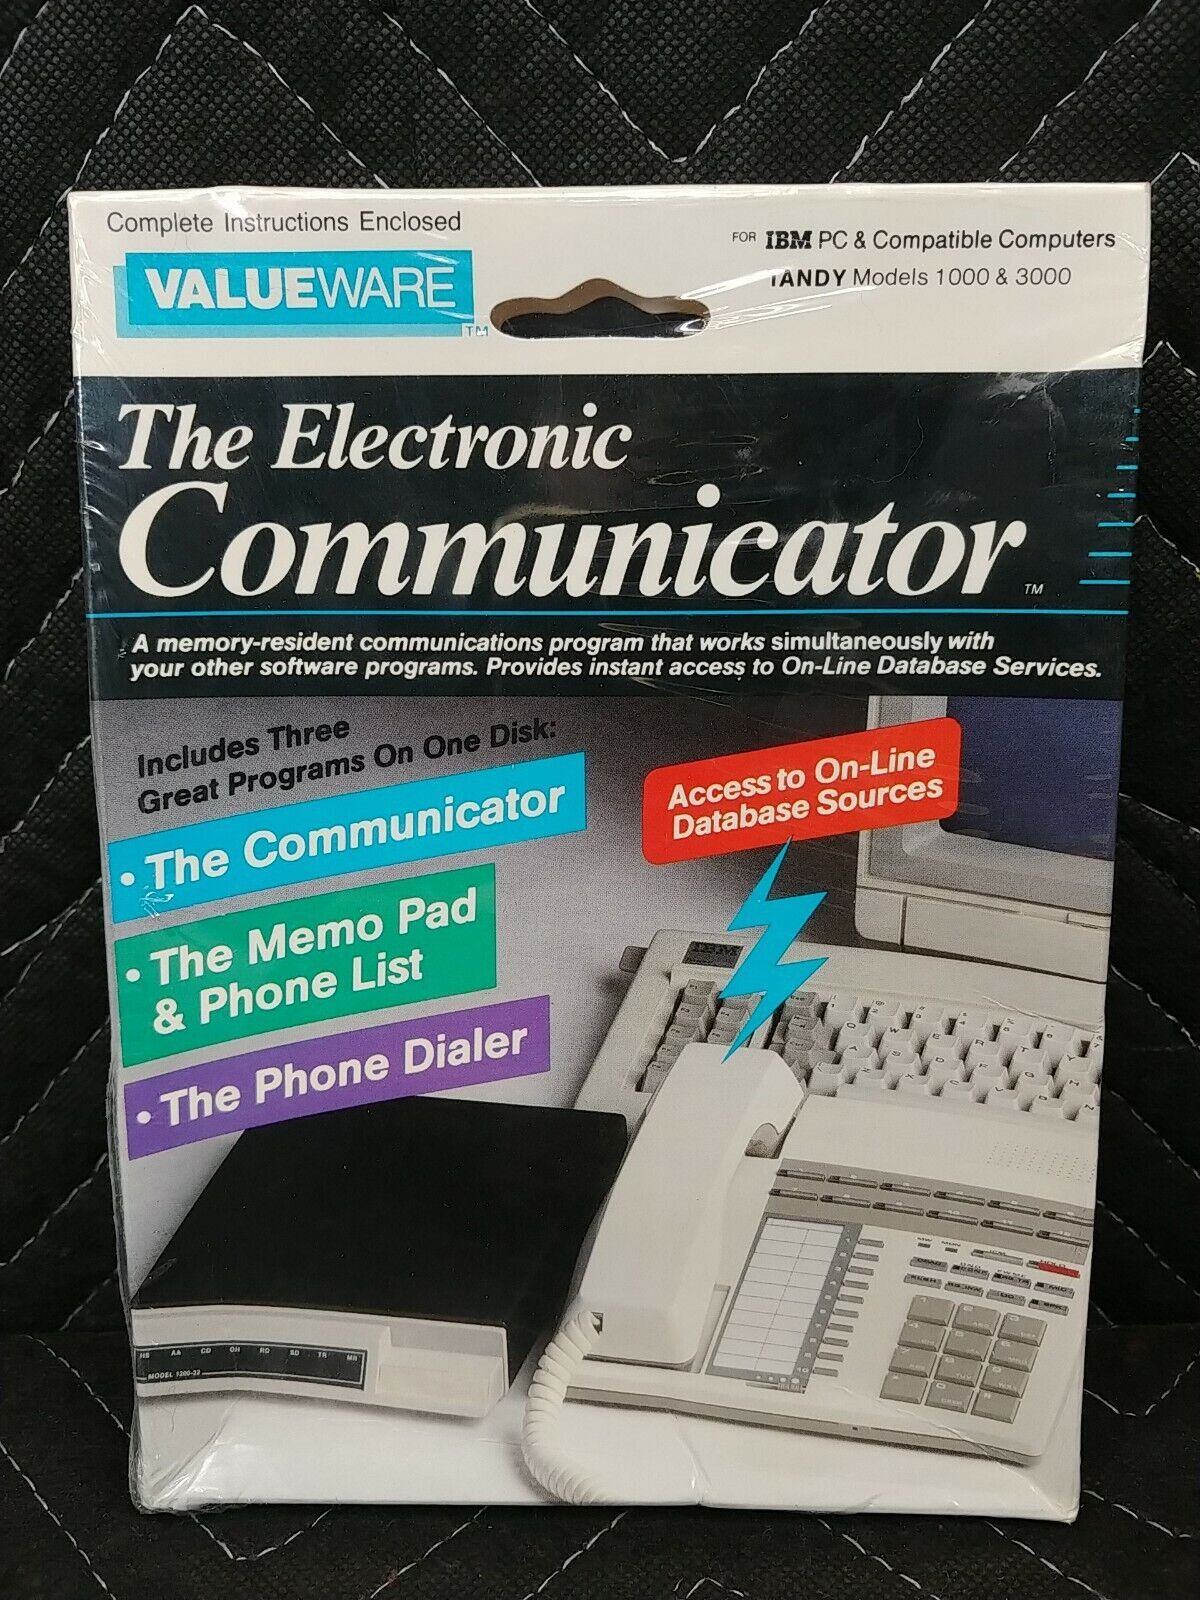 NOS Valuware The Electronic Communicator for IBM PC, Tandy Models 1000 & 3000